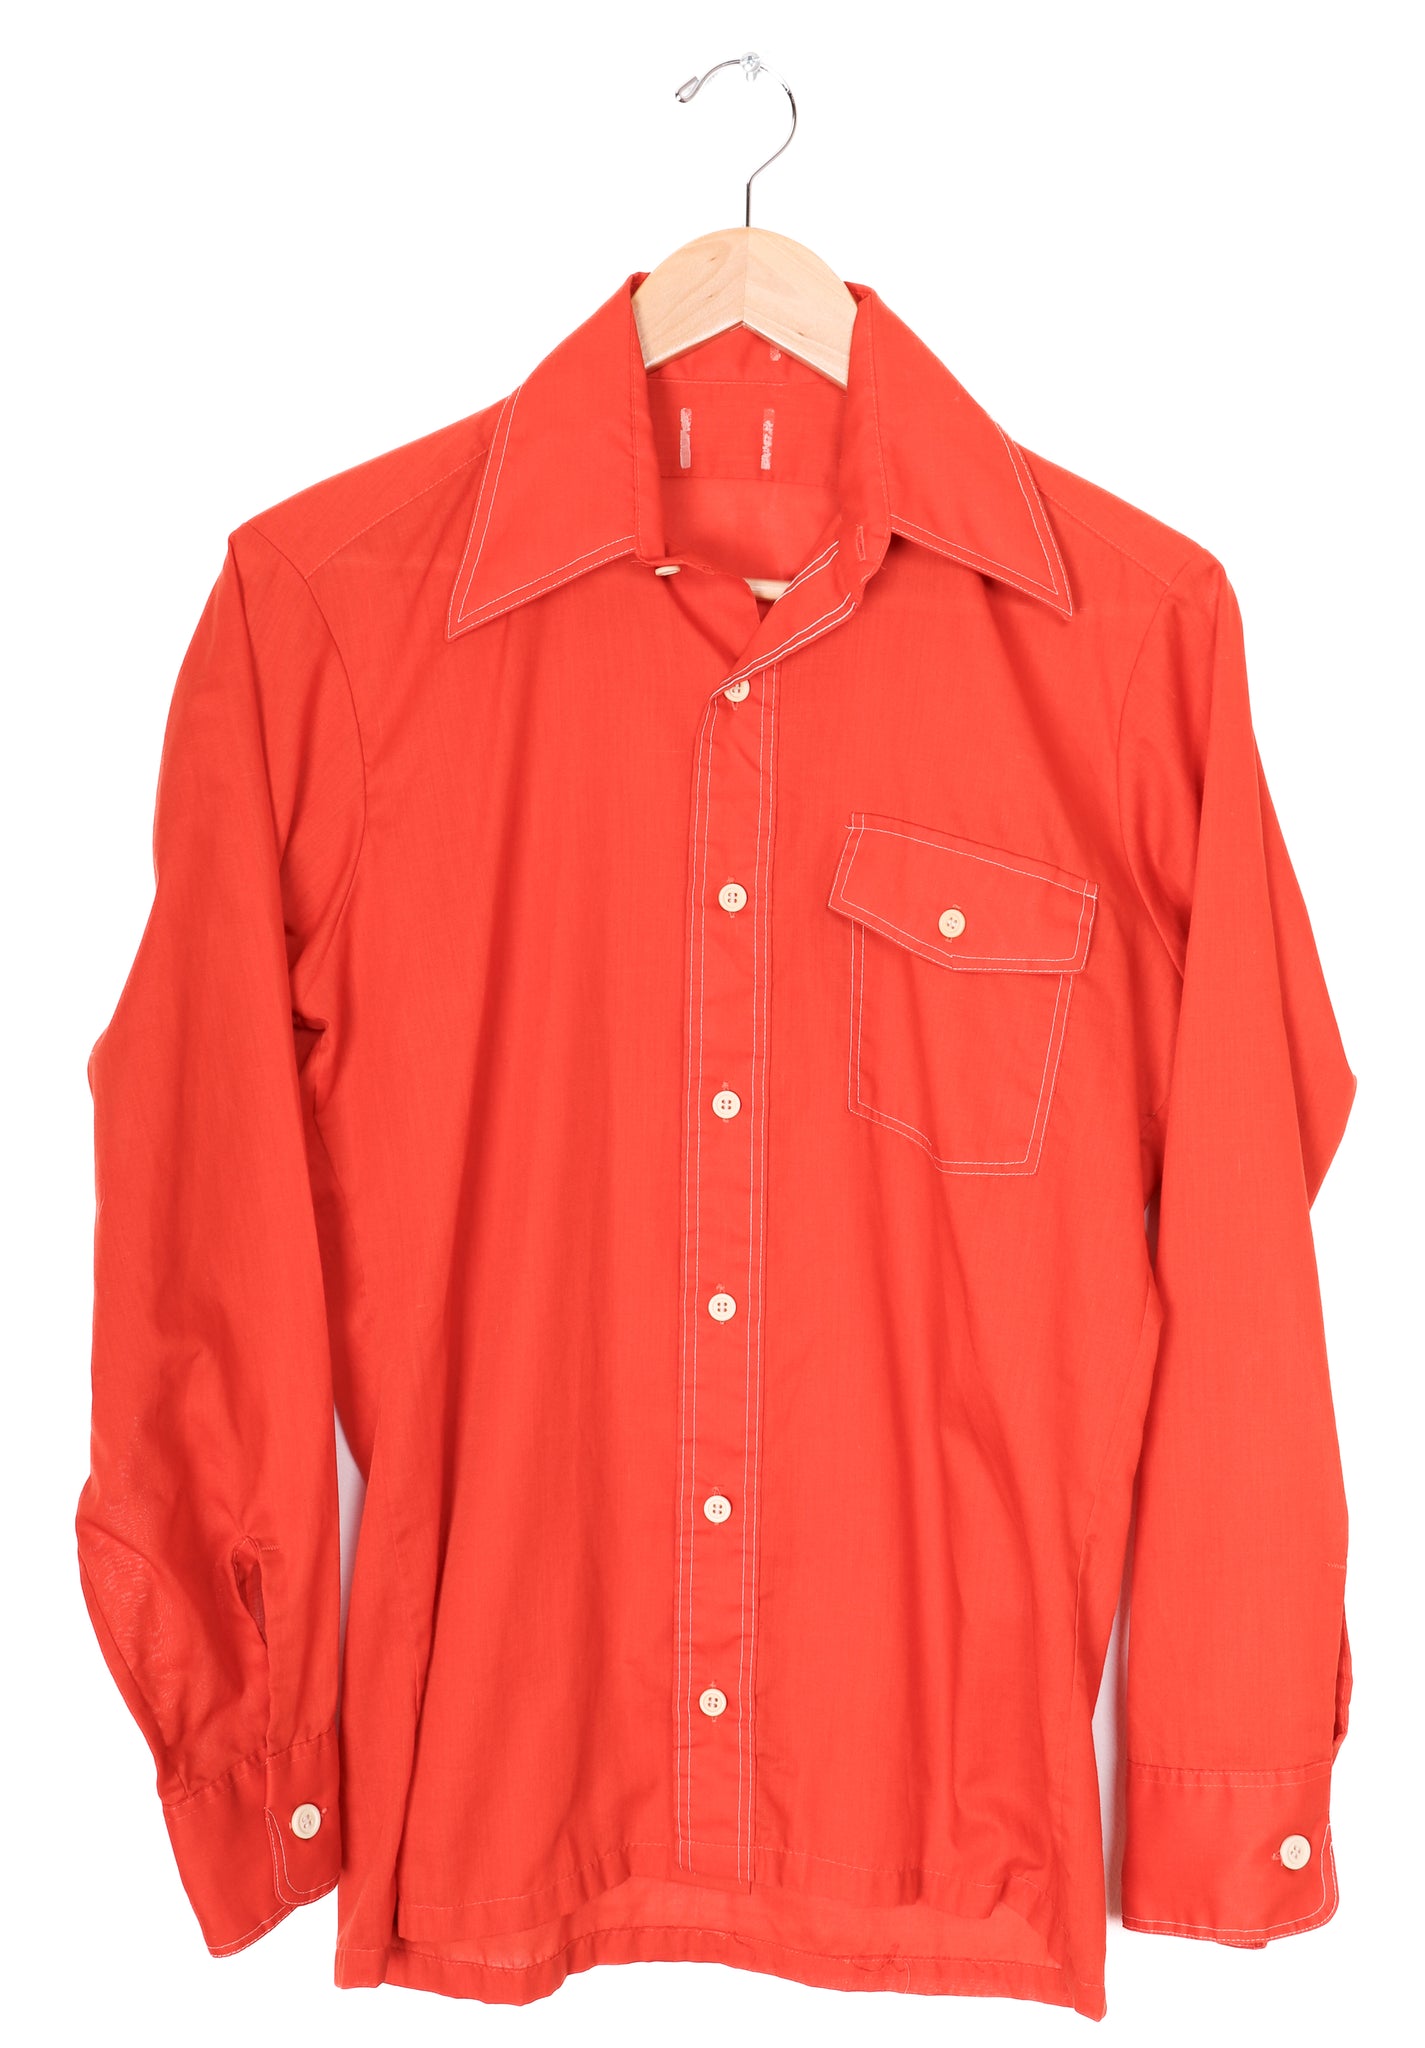 70s Orange Polyester Button Up